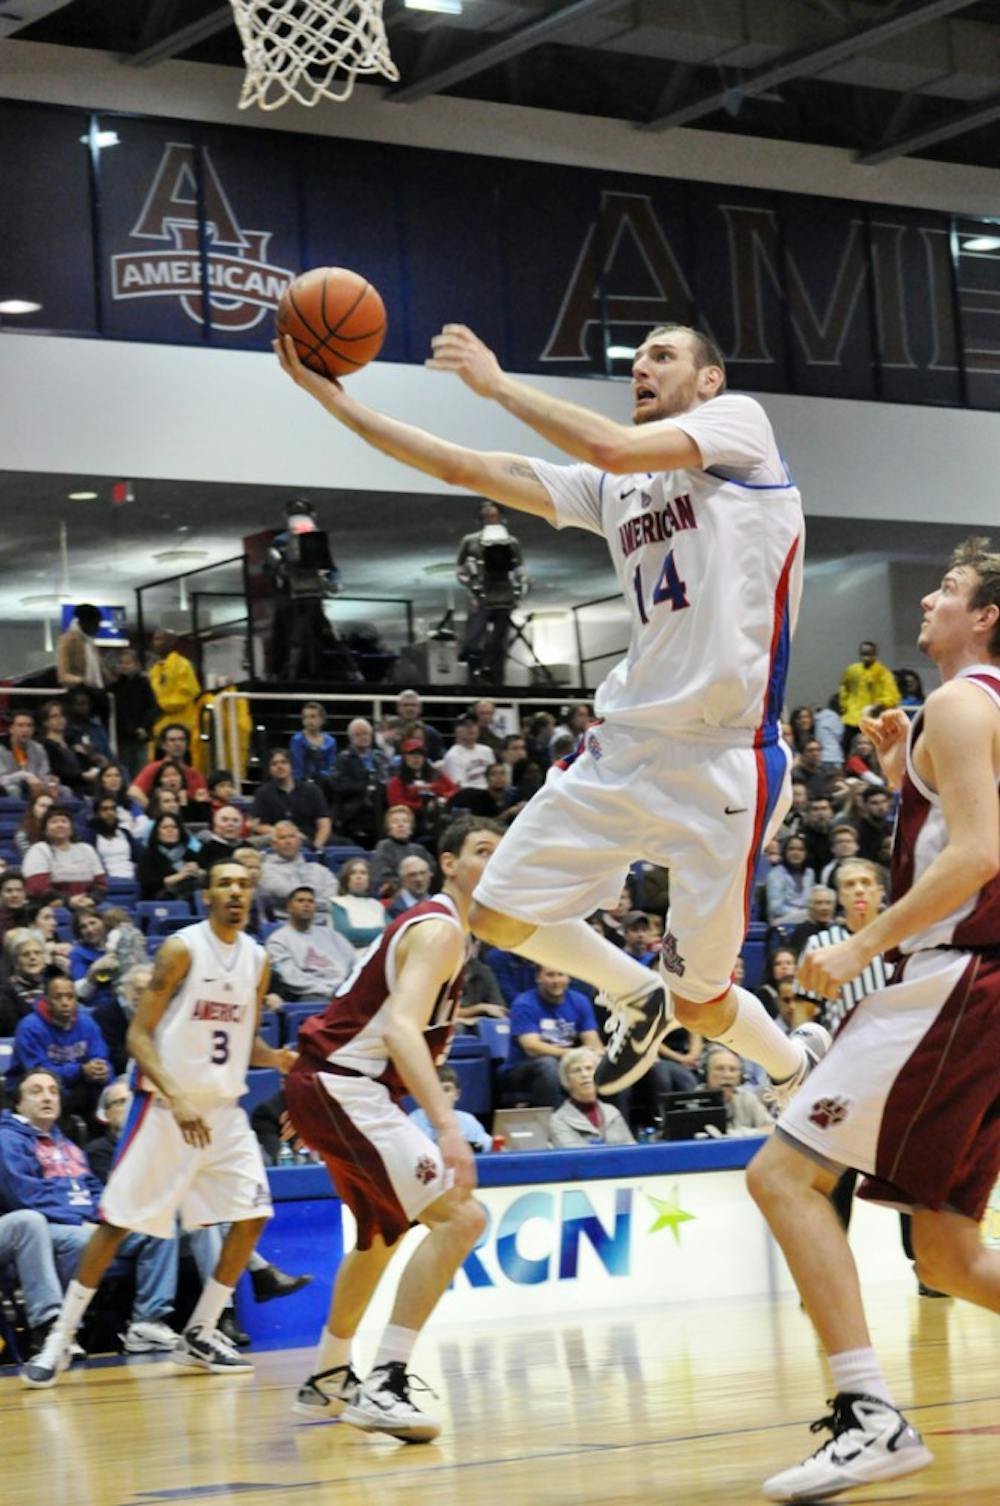 GOING STRONG â€” Vlad Moldoveanu scores two of his 17 points in Saturdayâ€™s 73-60 victory against the Lafayette Leopards.  